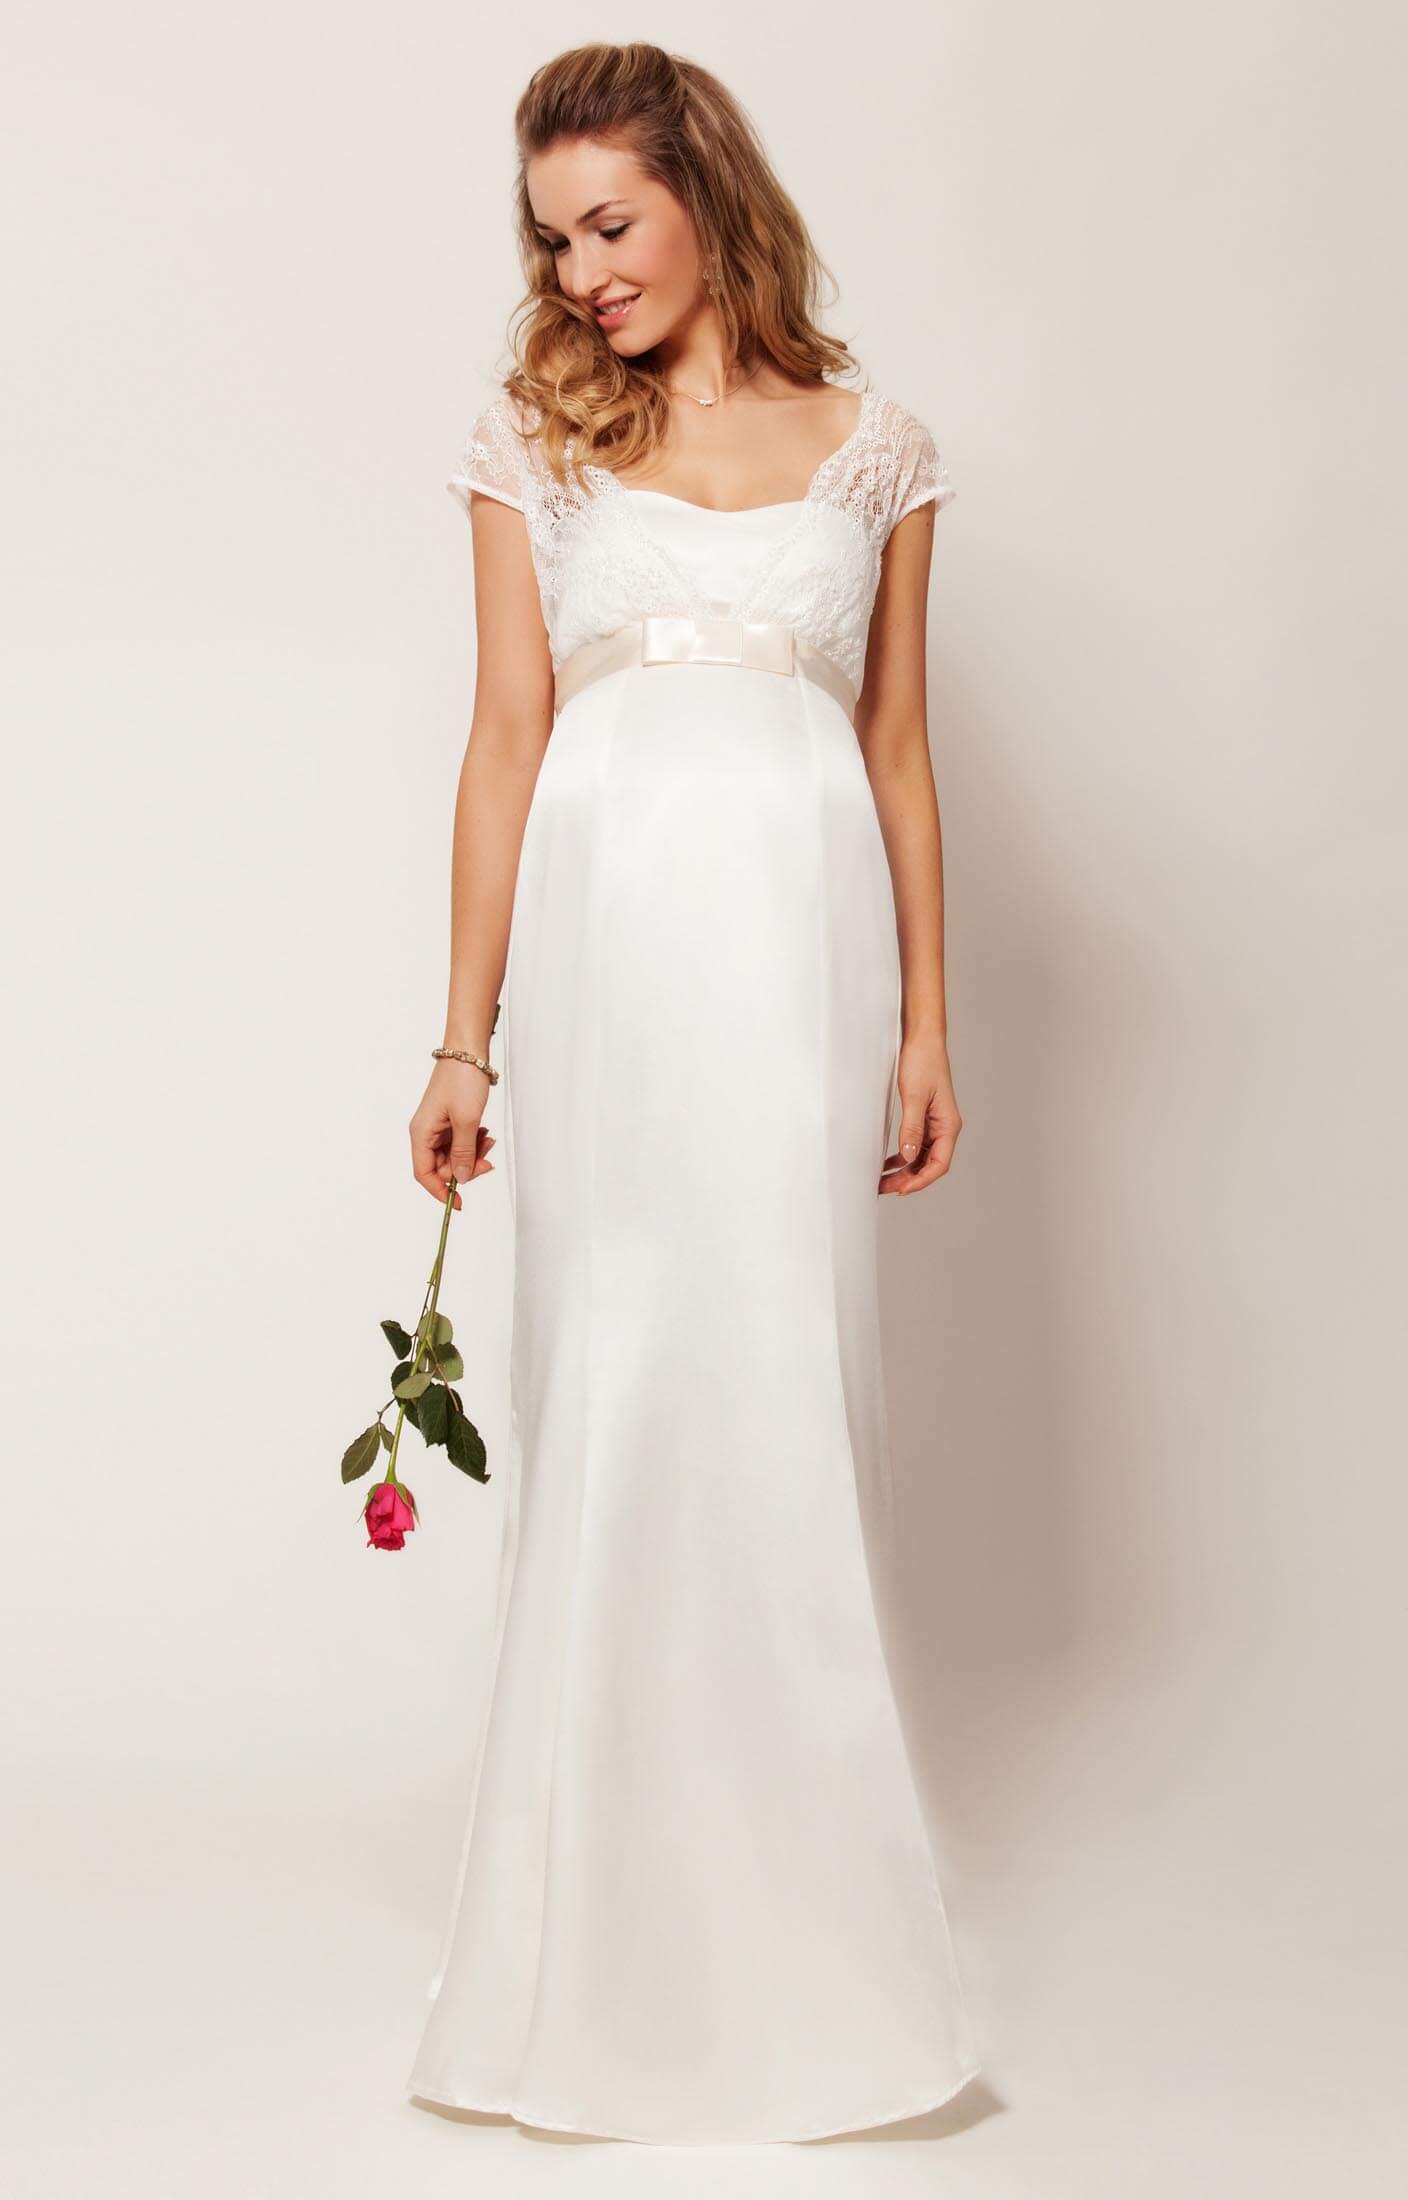 Great Maternity Wedding Dress Cheap of all time The ultimate guide 